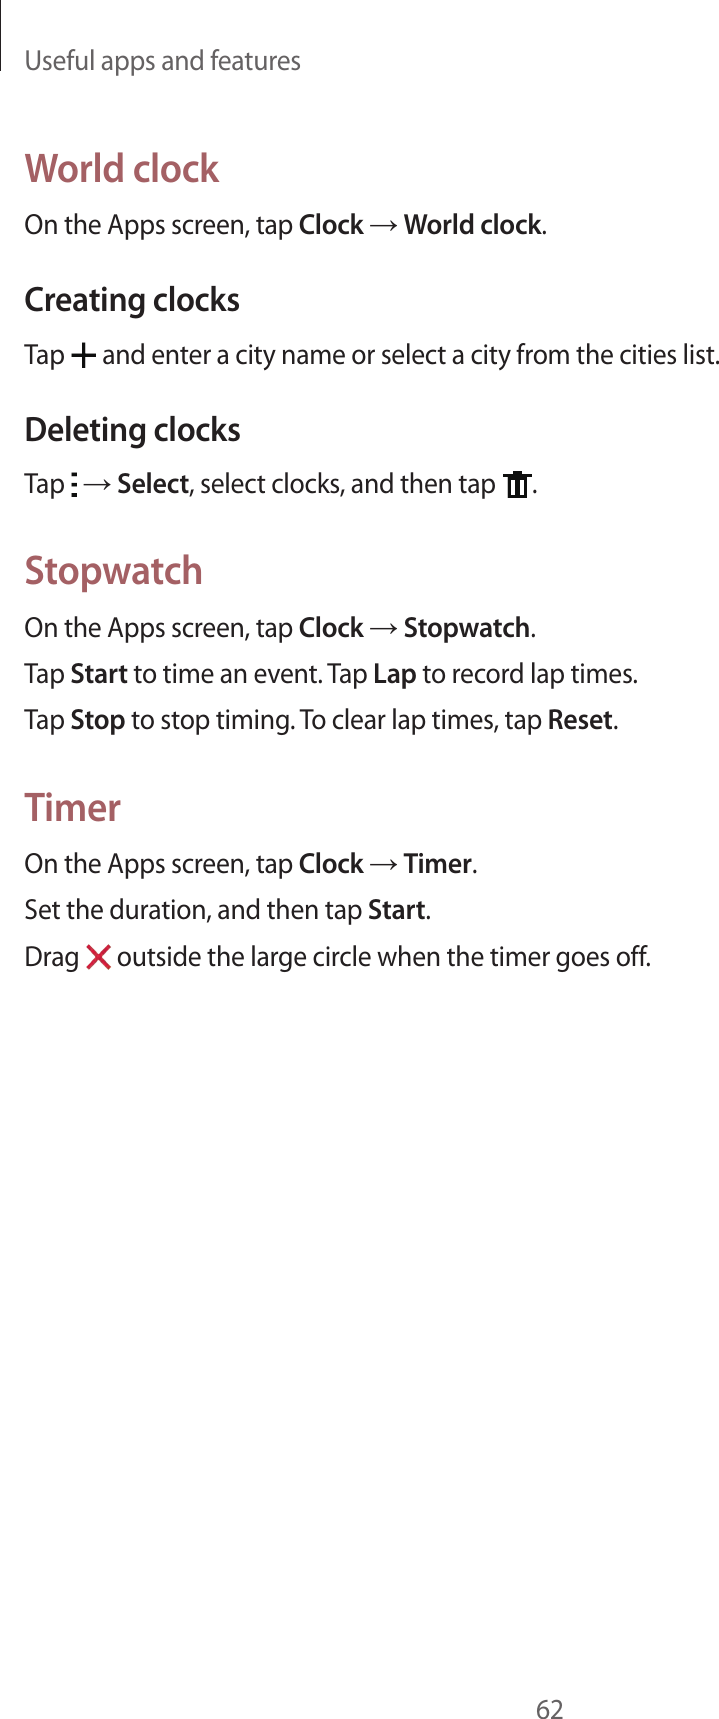 Useful apps and features62World clockOn the Apps screen, tap Clock → World clock.Creating clocksTap   and enter a city name or select a city from the cities list.Deleting clocksTap   → Select, select clocks, and then tap  .StopwatchOn the Apps screen, tap Clock → Stopwatch.Tap Start to time an event. Tap Lap to record lap times.Tap Stop to stop timing. To clear lap times, tap Reset.TimerOn the Apps screen, tap Clock → Timer.Set the duration, and then tap Start.Drag   outside the large circle when the timer goes off.